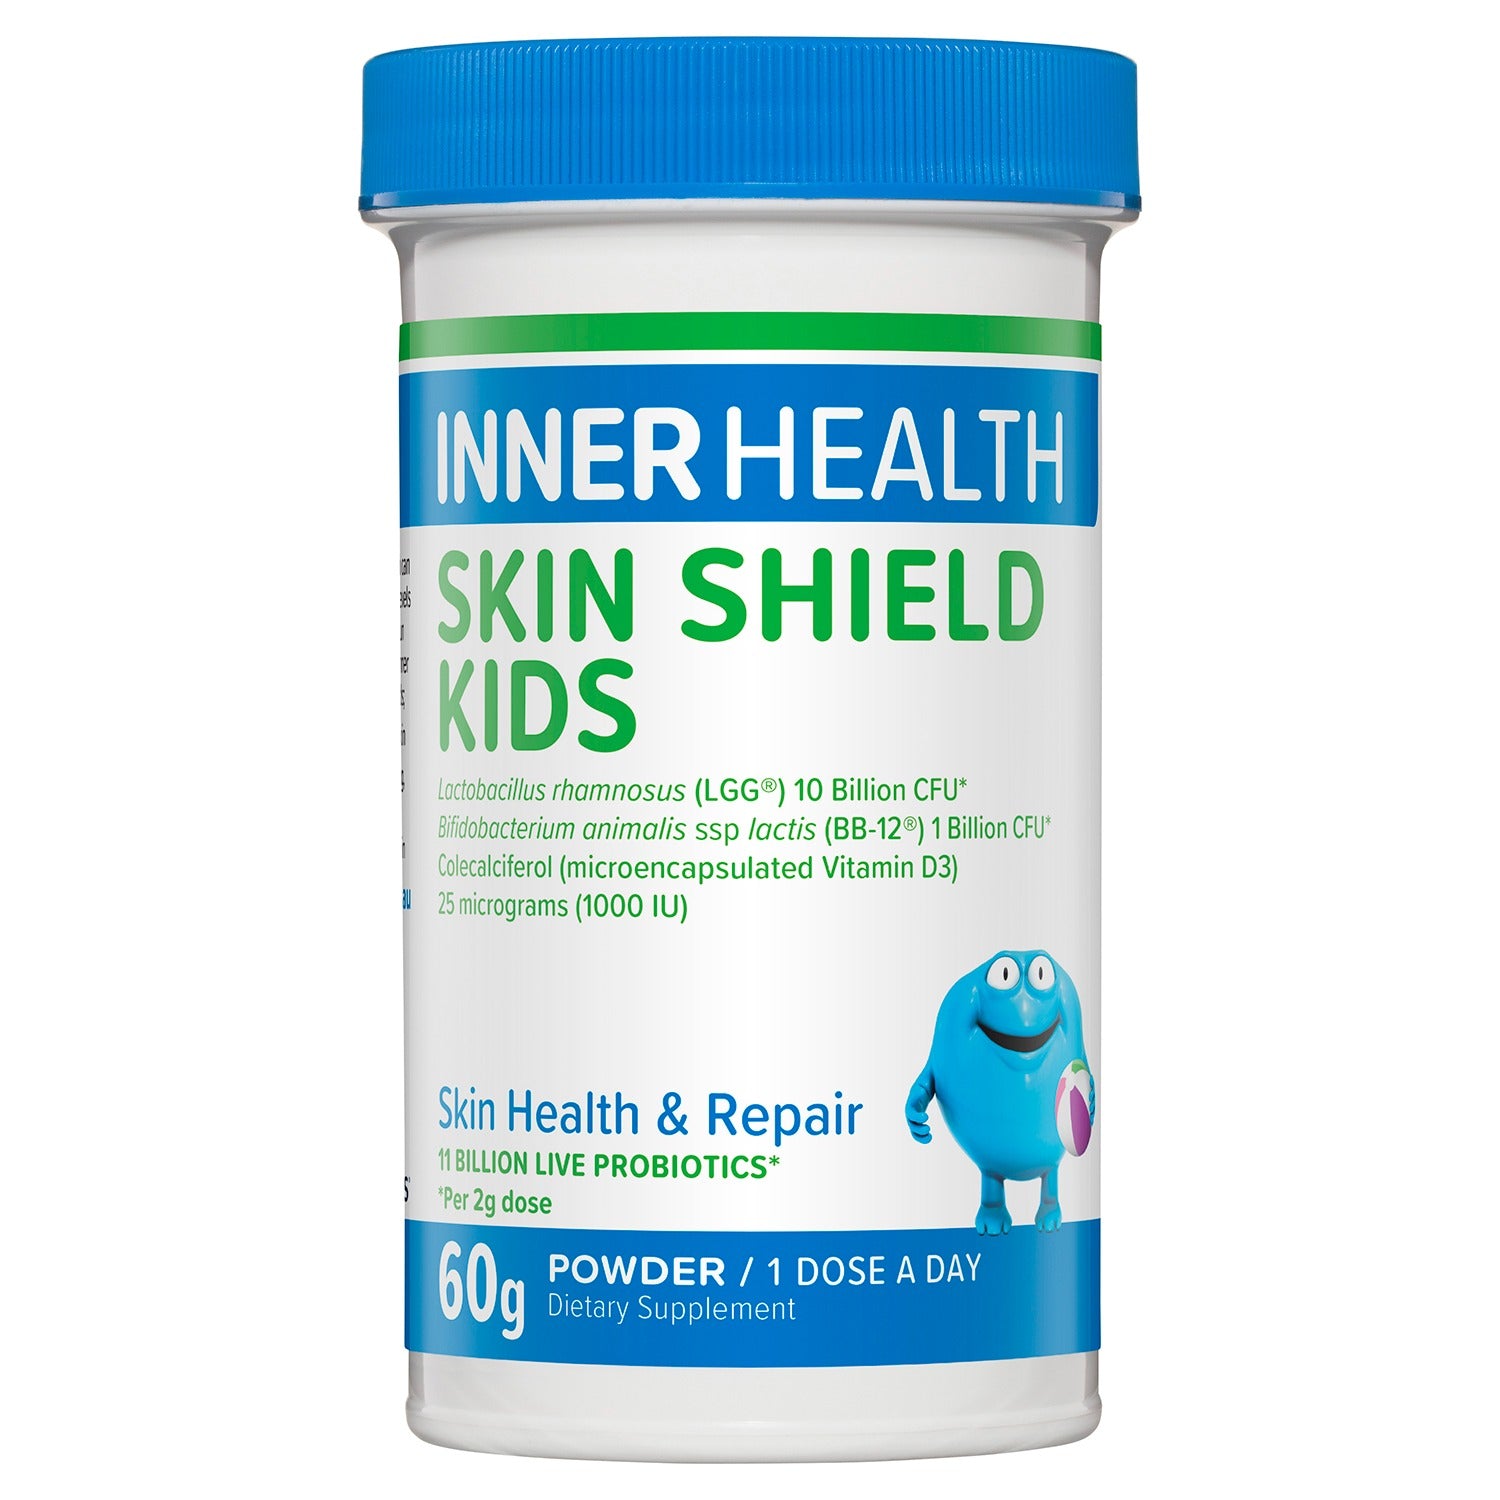 Inner Health Skin Shield Kids 60g - Specialized Formula for Eczema Relief and Healthy Skin in Children